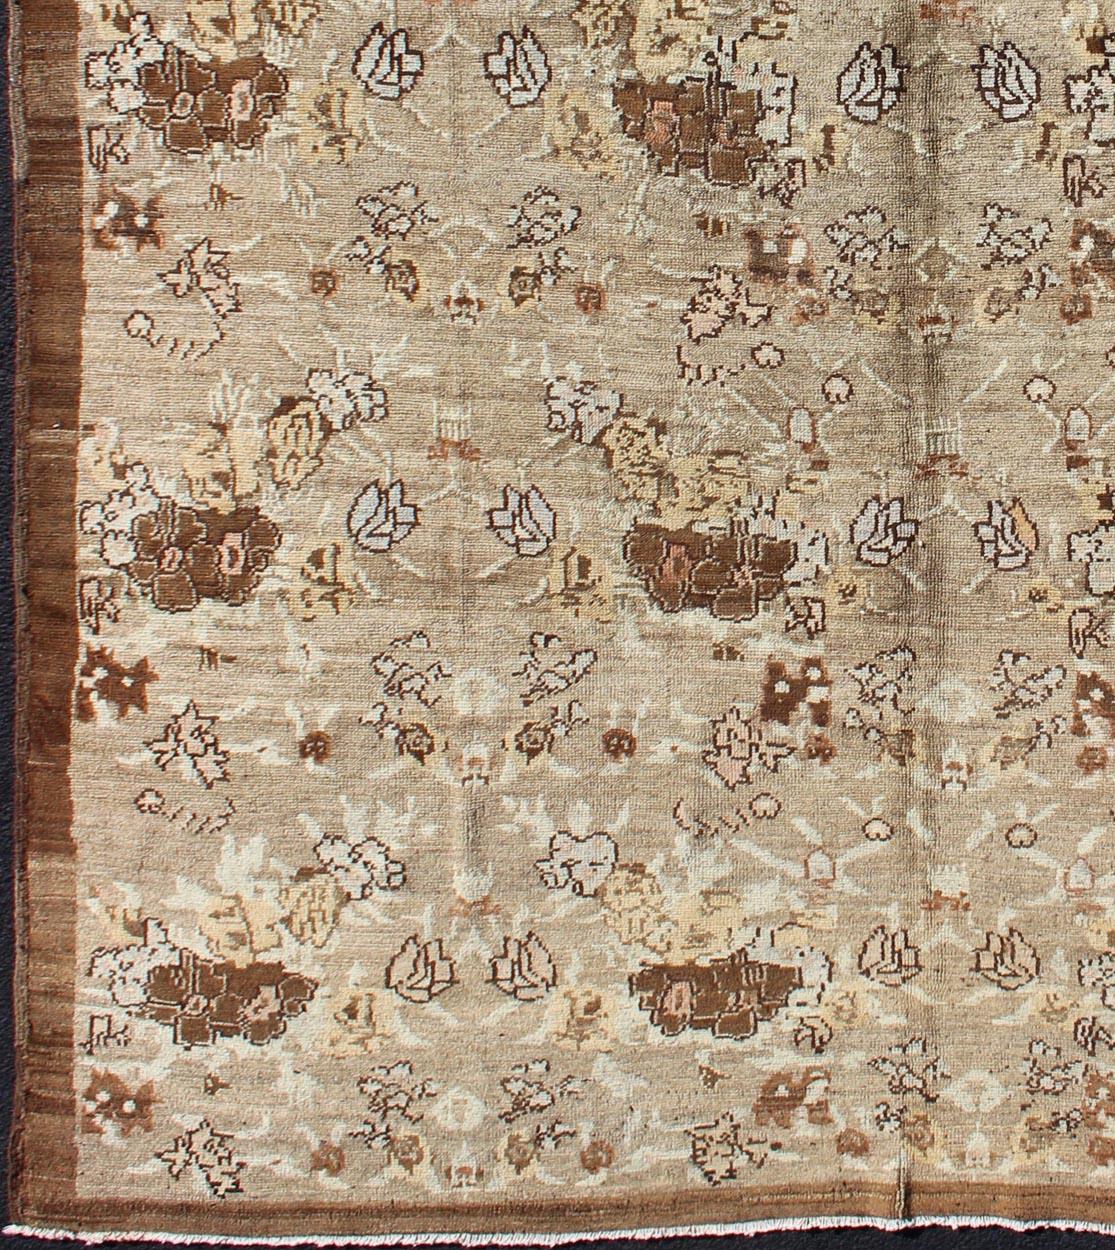 Large Antique Turkish Tulu Carpet with Floral Design in Tan & Brown, Rug/NA-75020, 

This unusually large Tulu features an all-over floral design in Tan and Taupe. The earth tone colors are complemented by a solid brown border. Other colors include